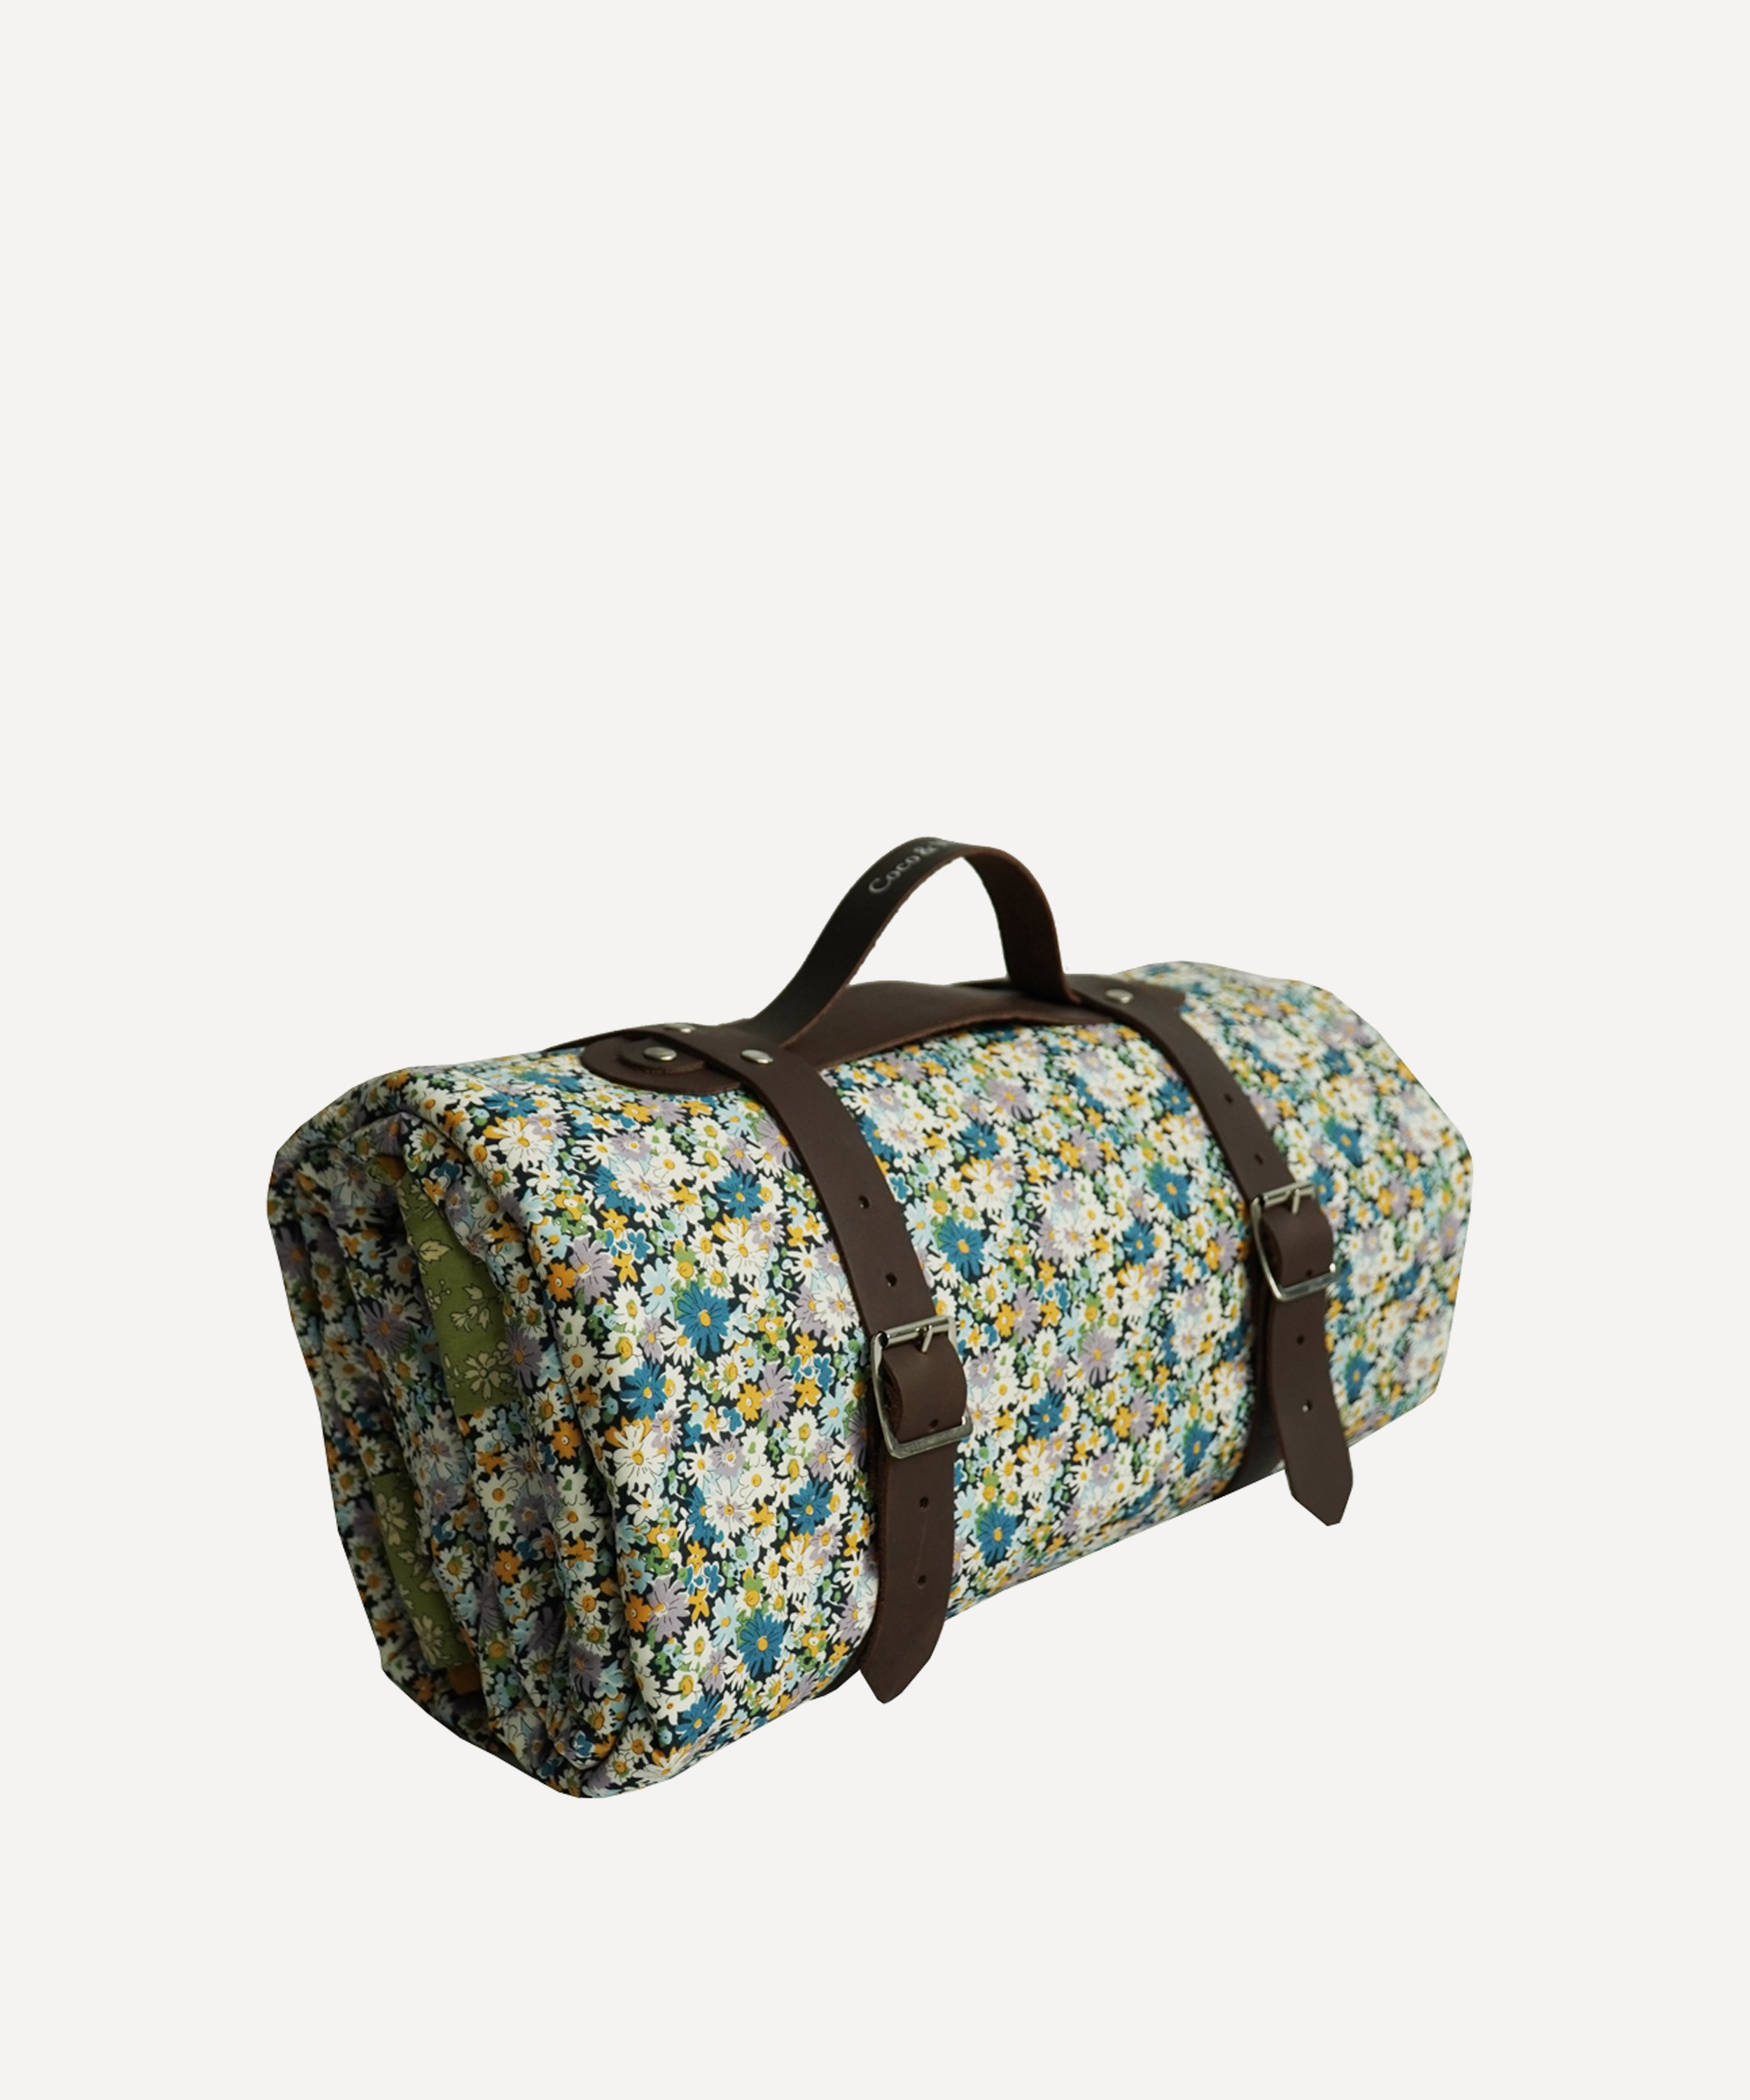 Coco & Wolf - Libby and Capel Pistachio Picnic Blanket